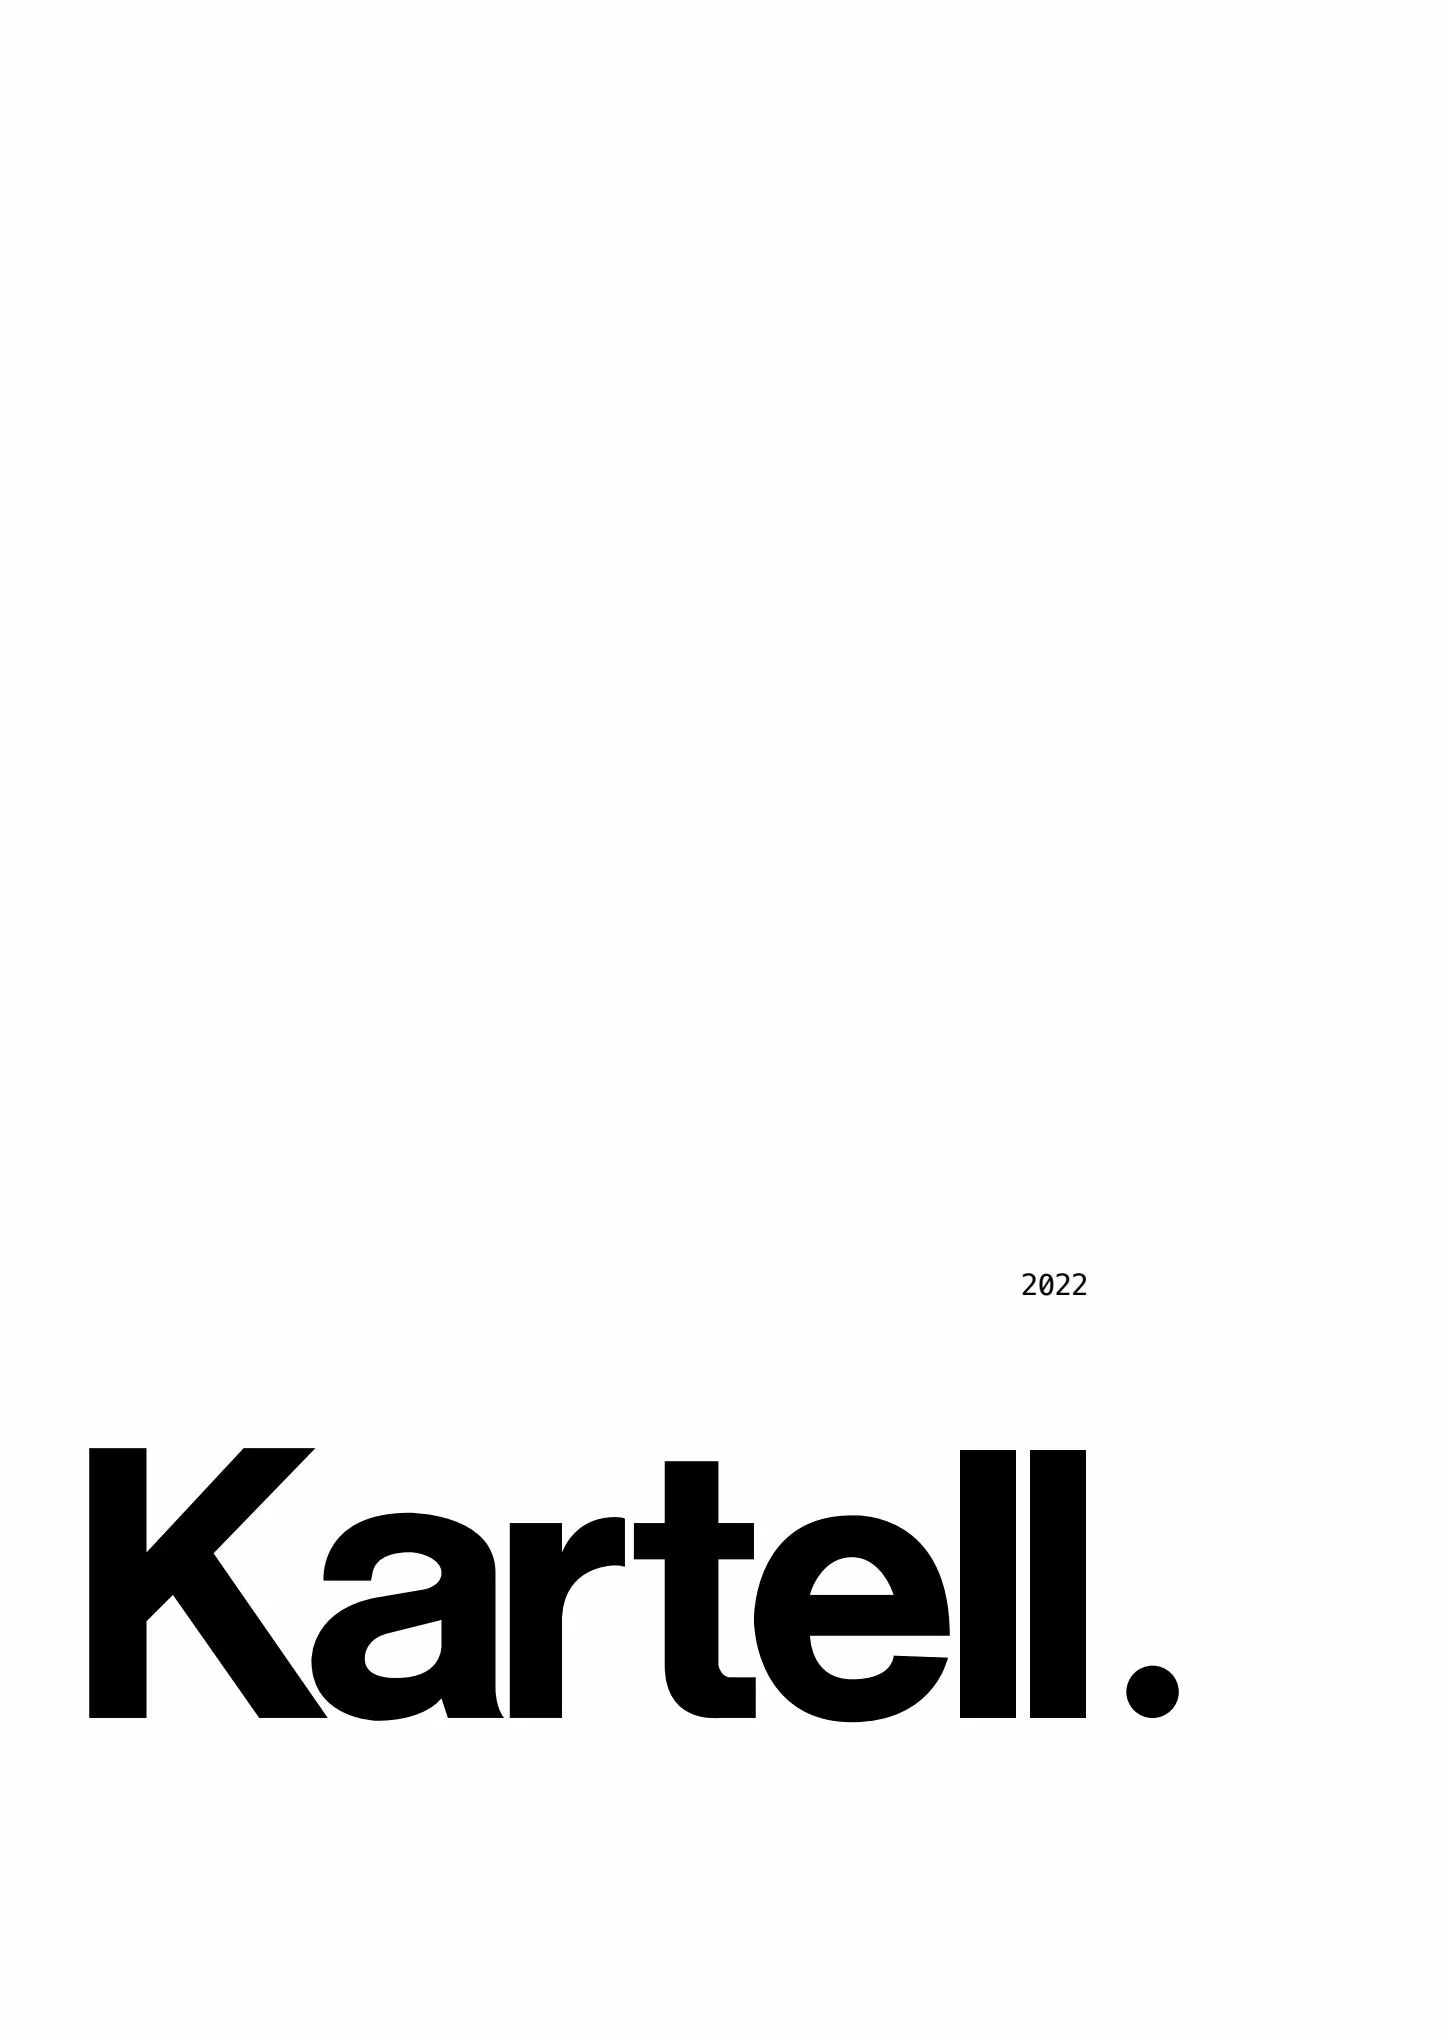 Catalogue KARTELL 2022, page 00001